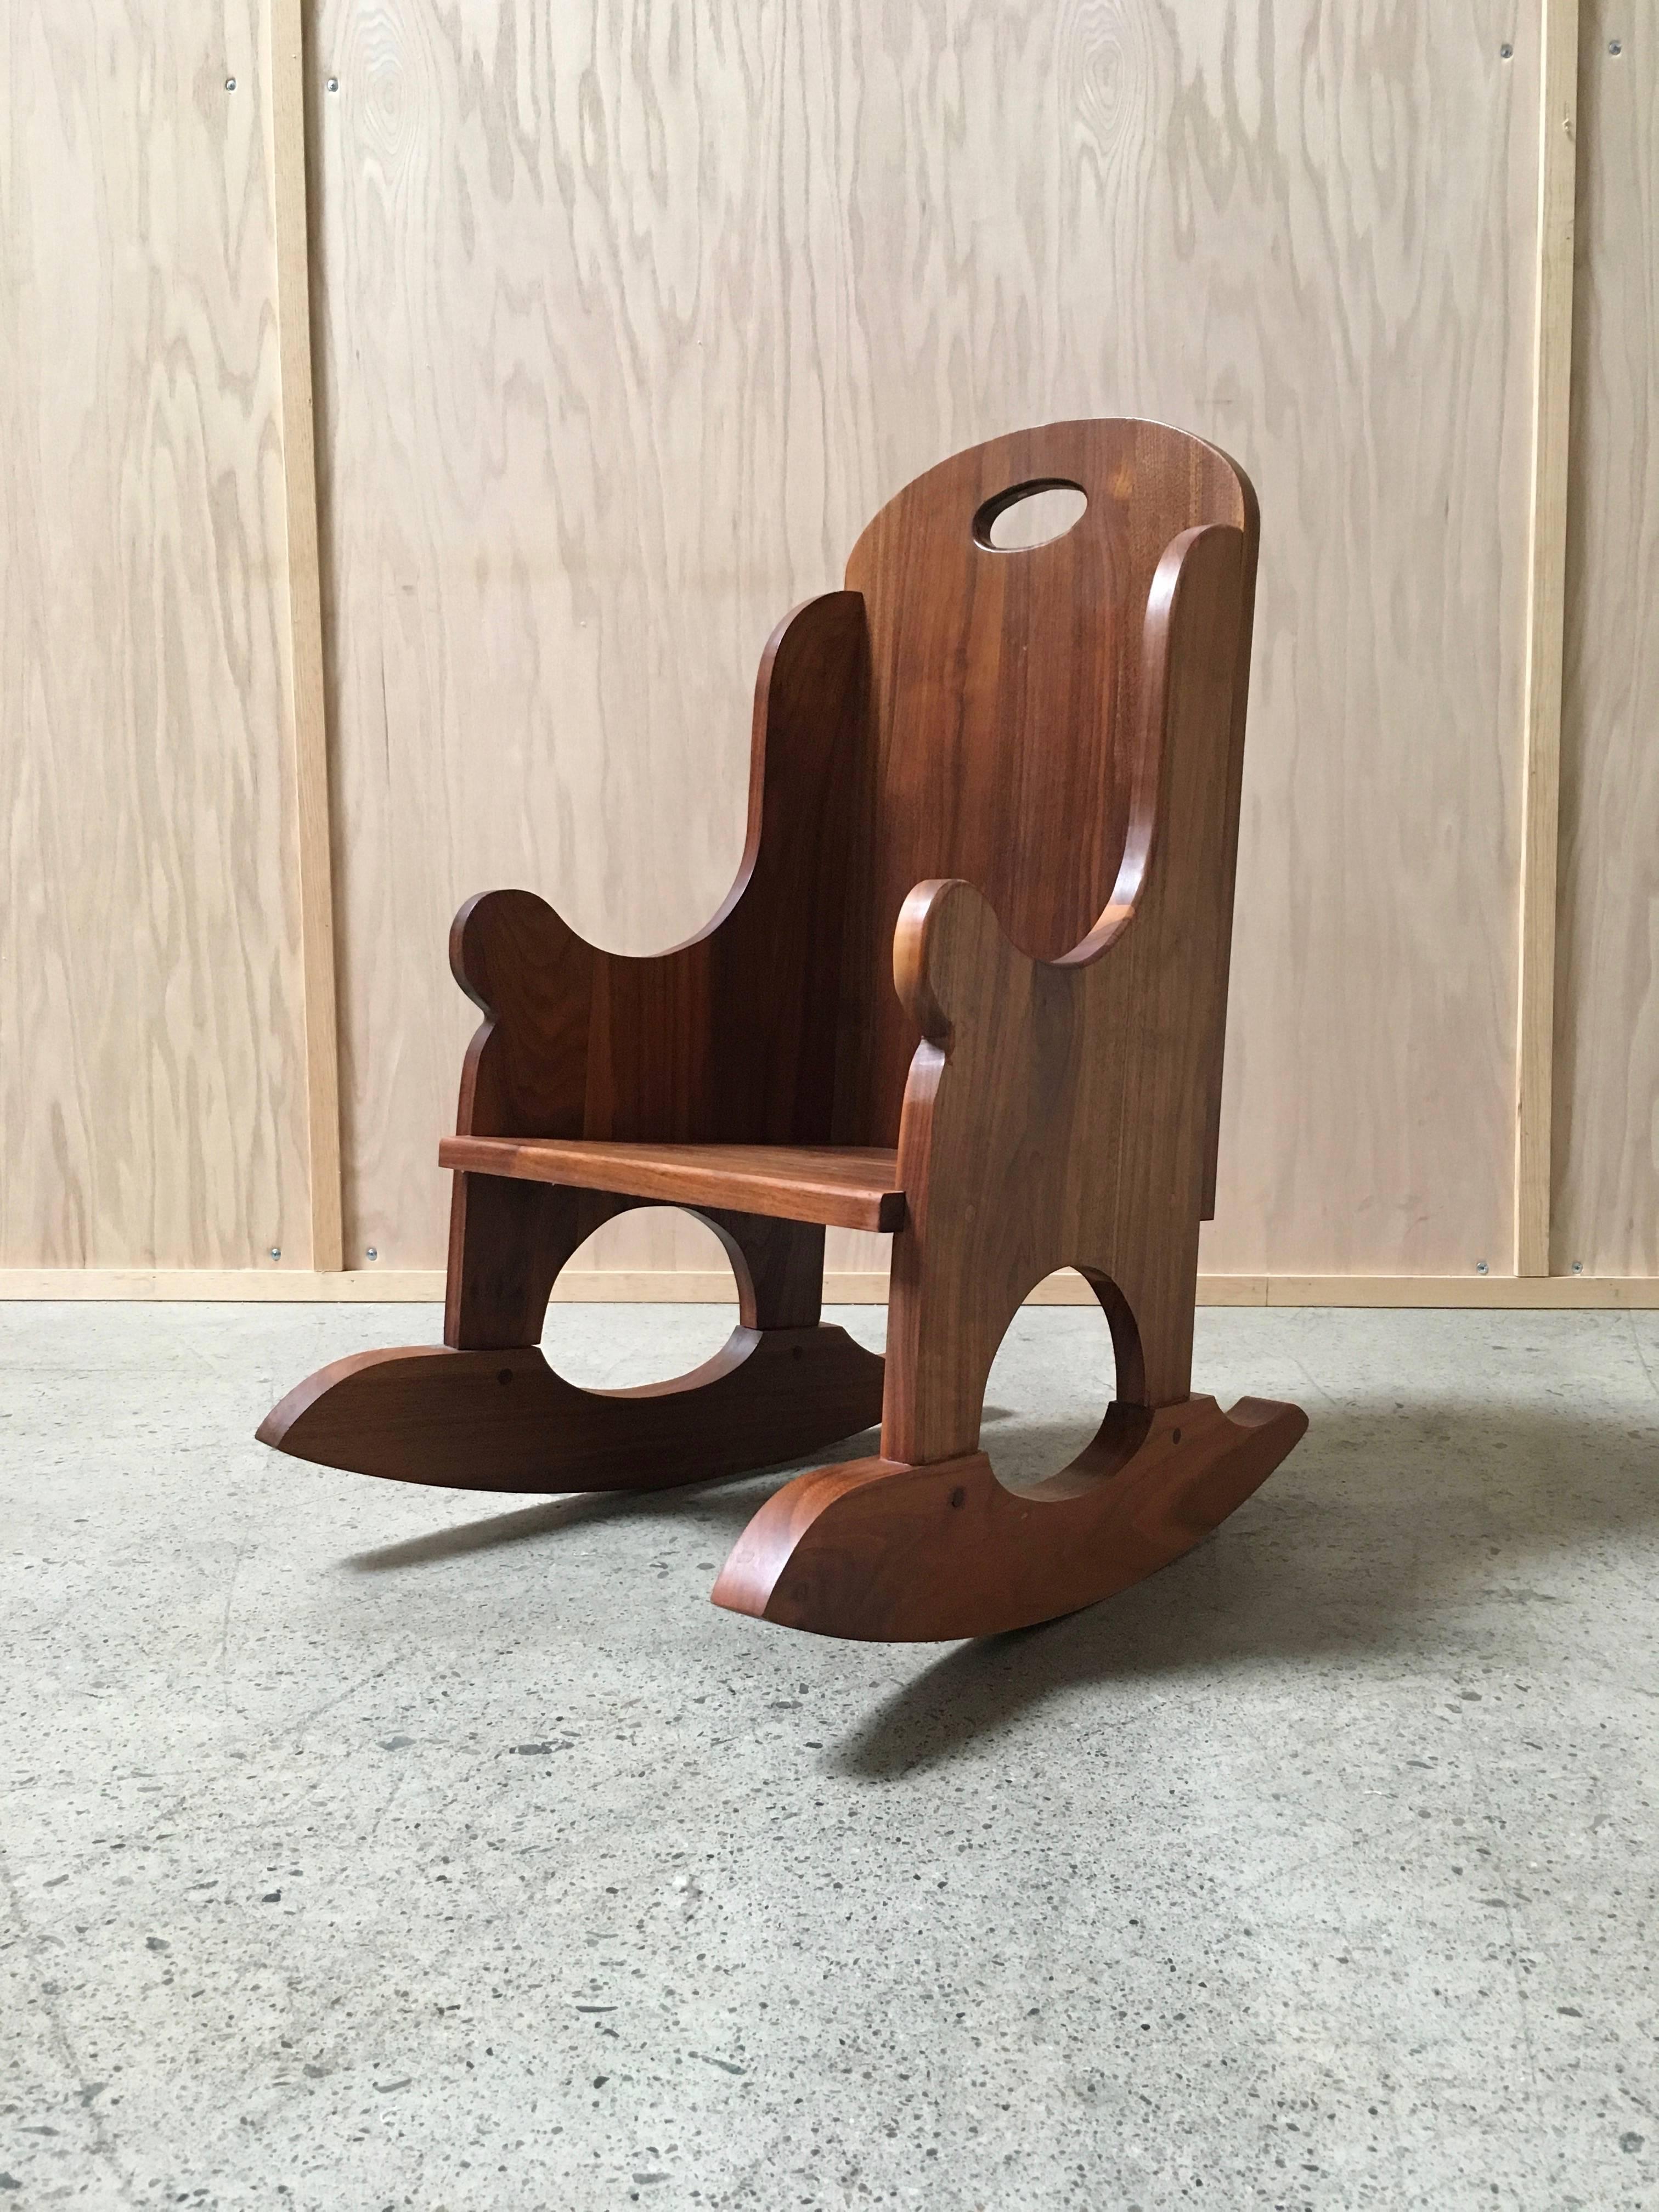 20th Century Studio Crafted Childs Rocking Chair   MOVING SALE!!!!